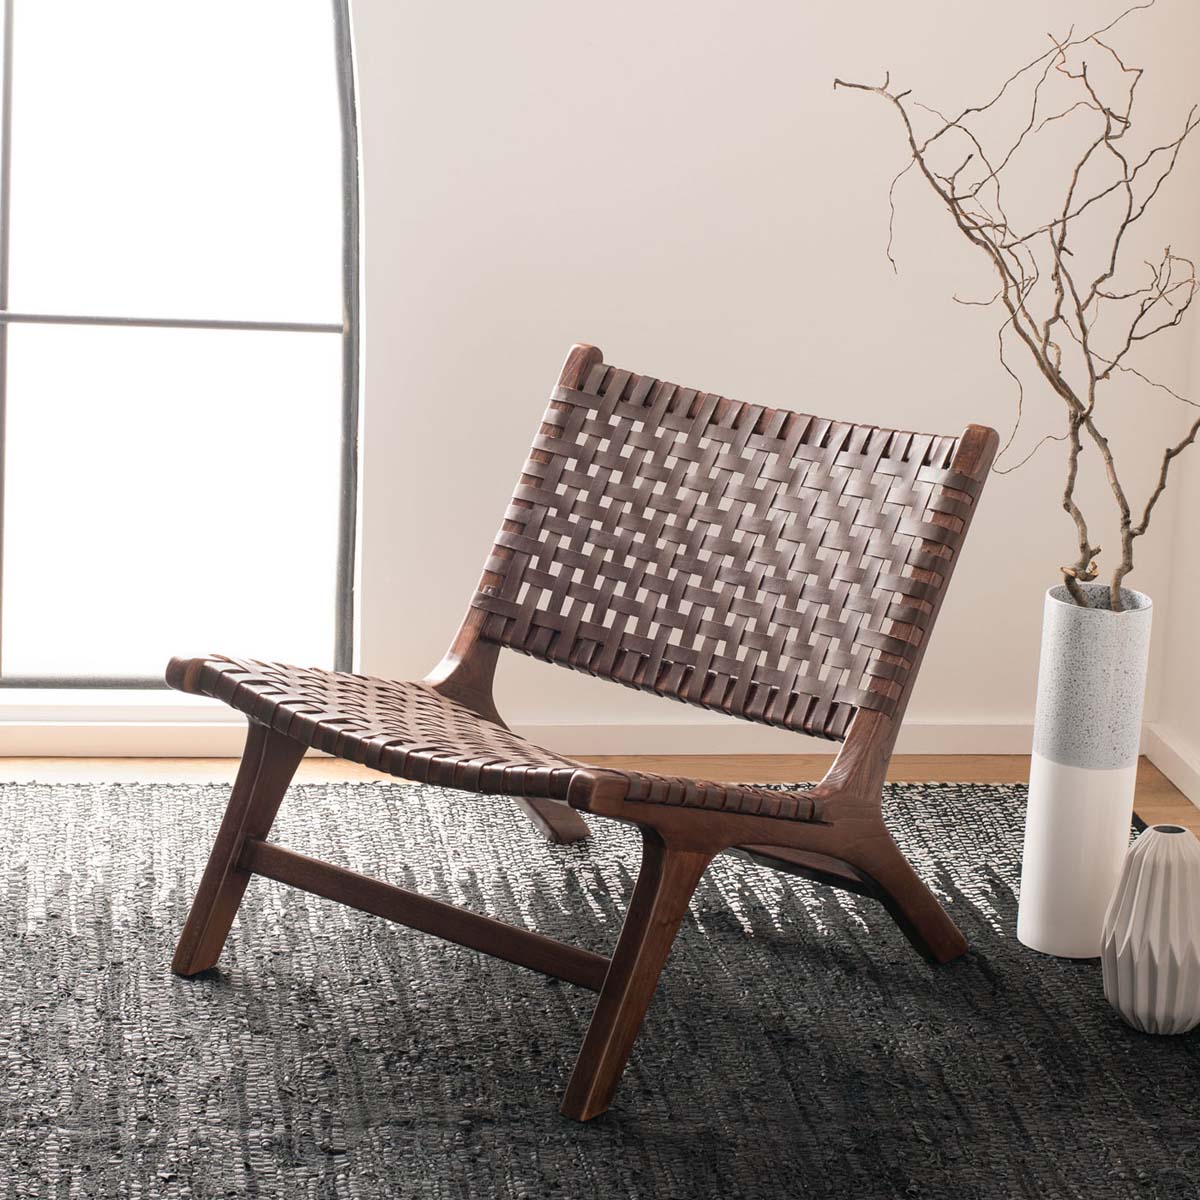 Safavieh Luna Leather Woven Accent Chair , ACH1002 - Brown Leather/Brown